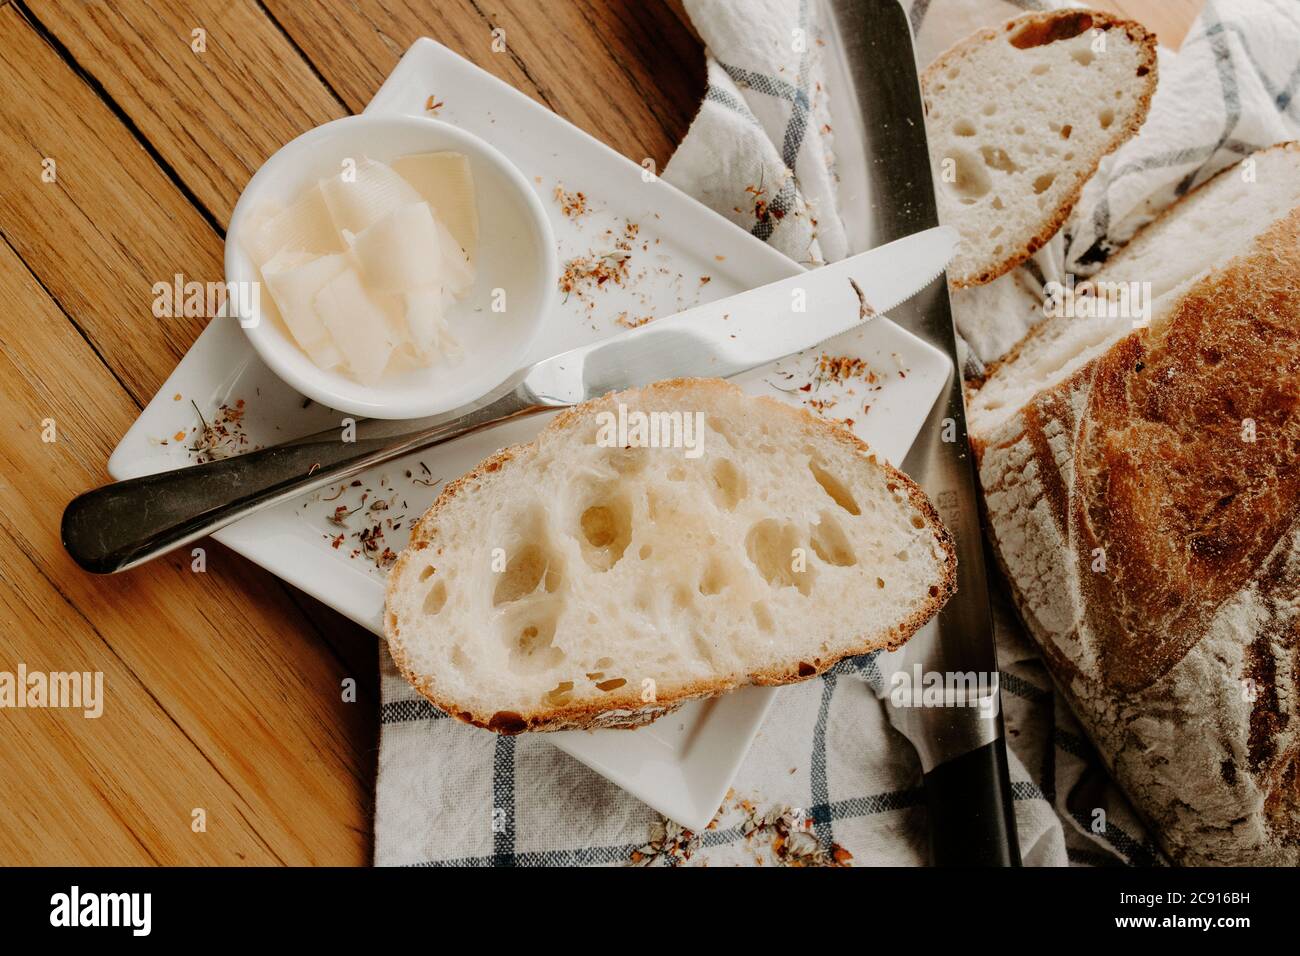 crumb, carbohydrates, baker bread, lunch, kitchen table, authentic, closeup, buttered, crusty, loaf of bread, sourdough on wooden table, artisan baker Stock Photo